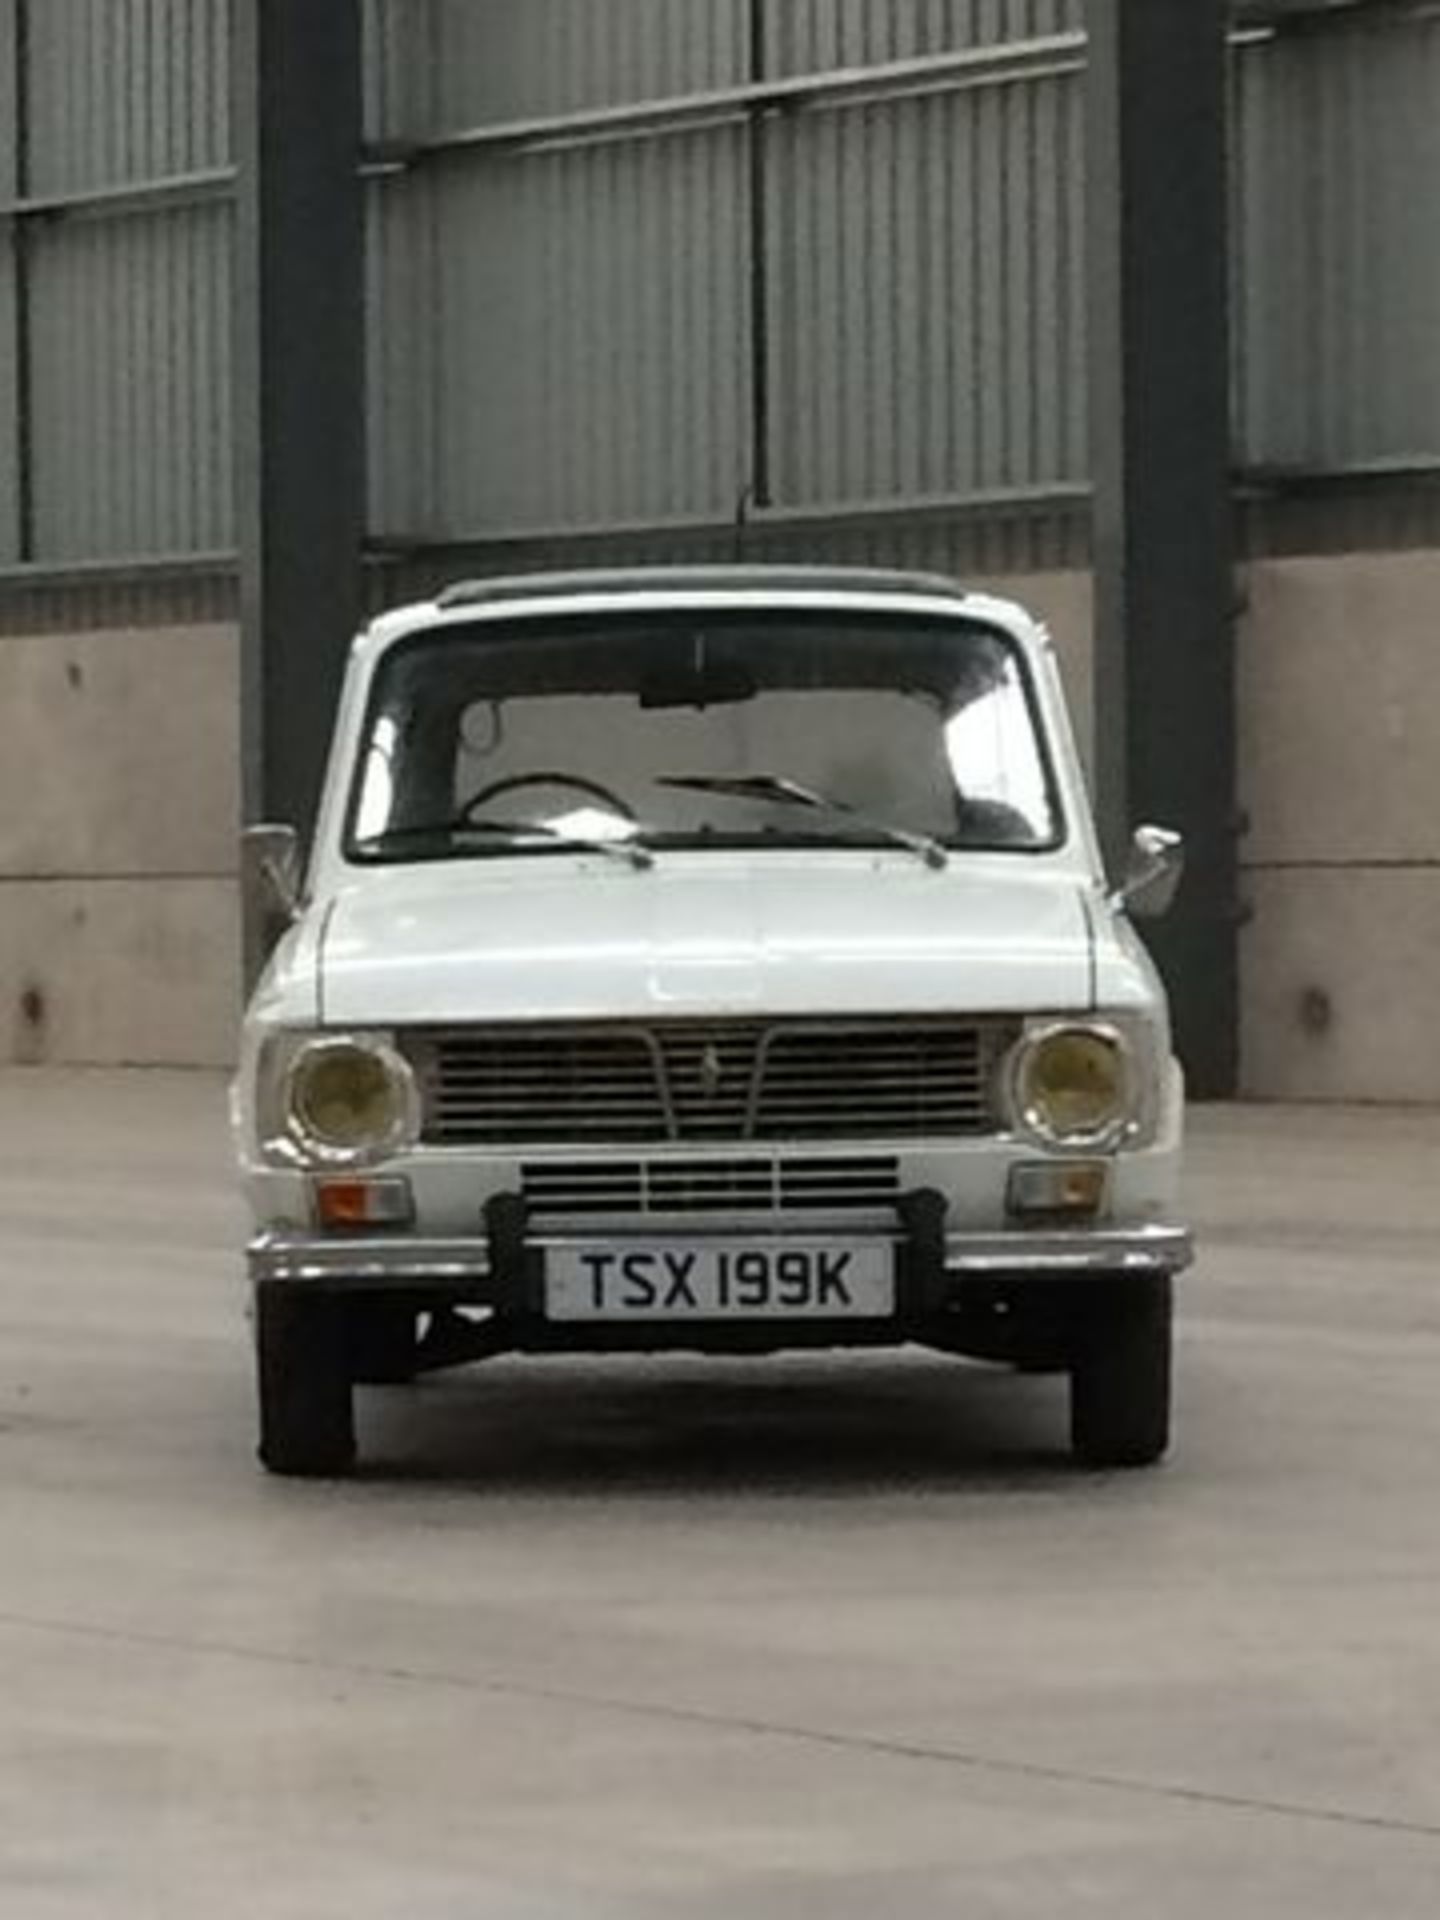 RENAULT 6 TL - 1108cc - Image 8 of 34